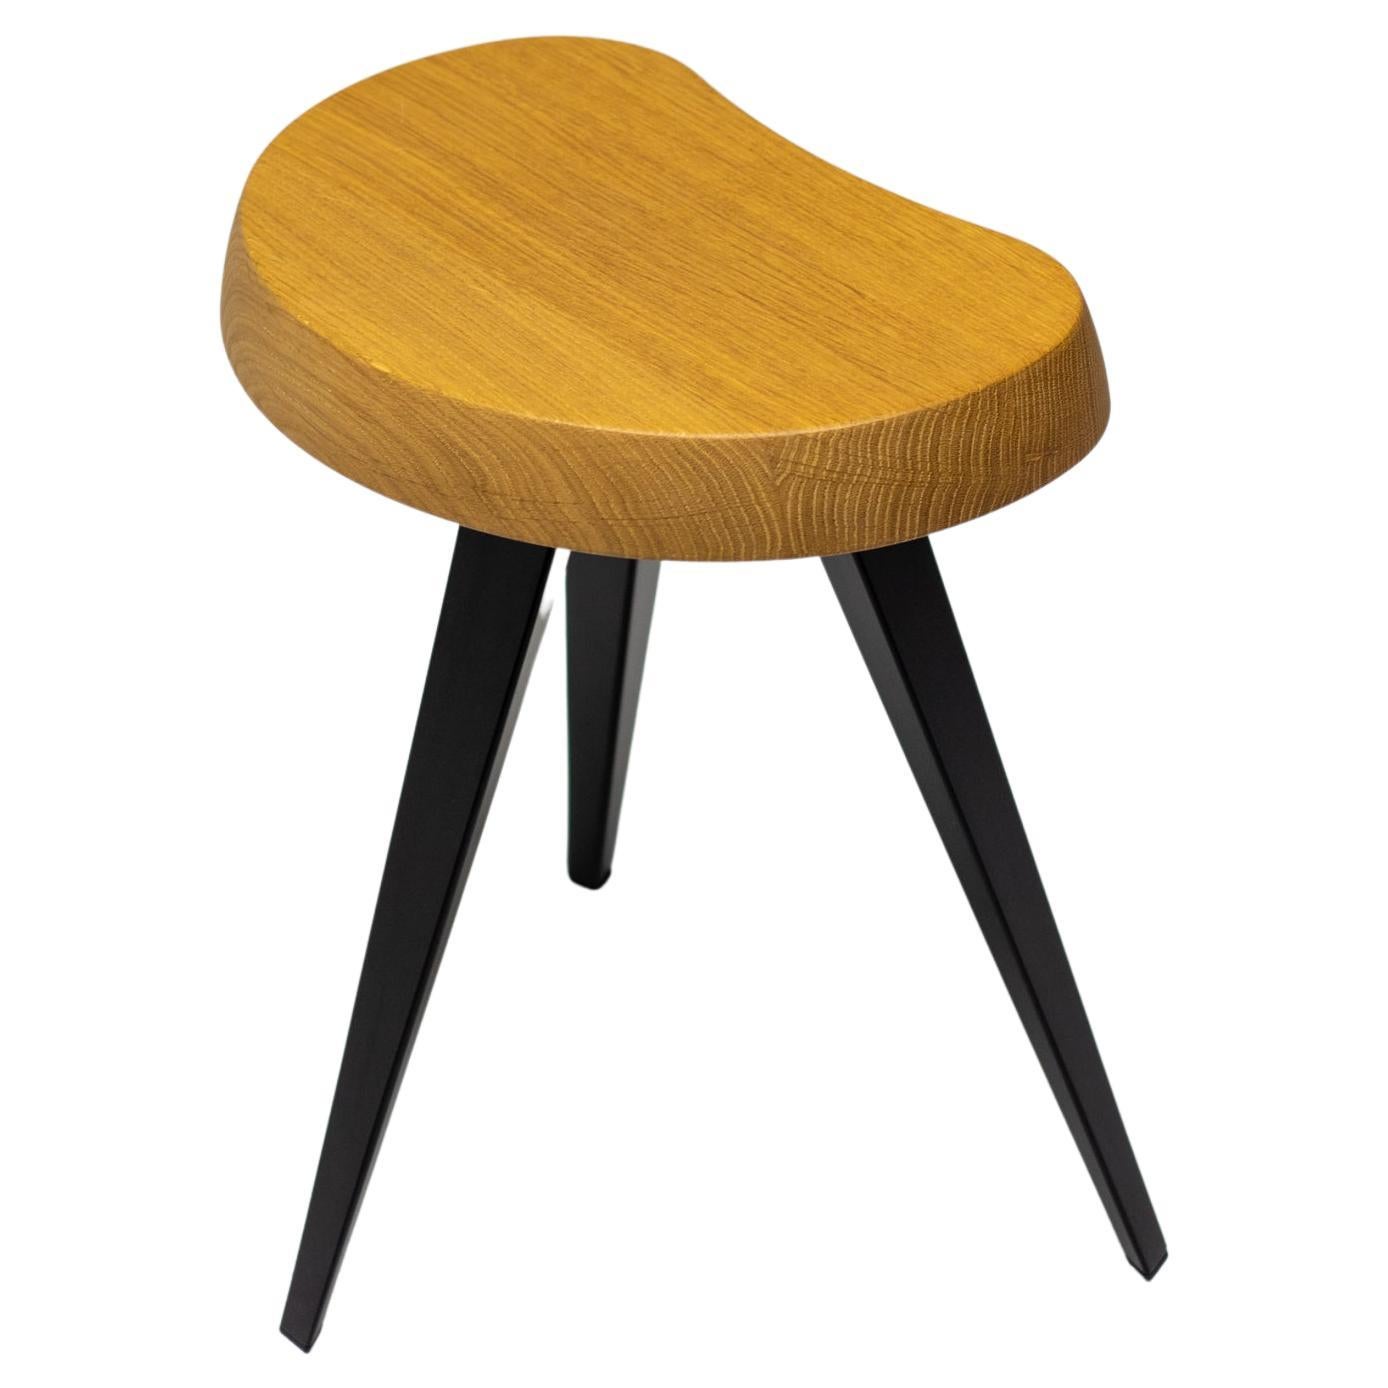 Charlotte Perriand Mexique Stool